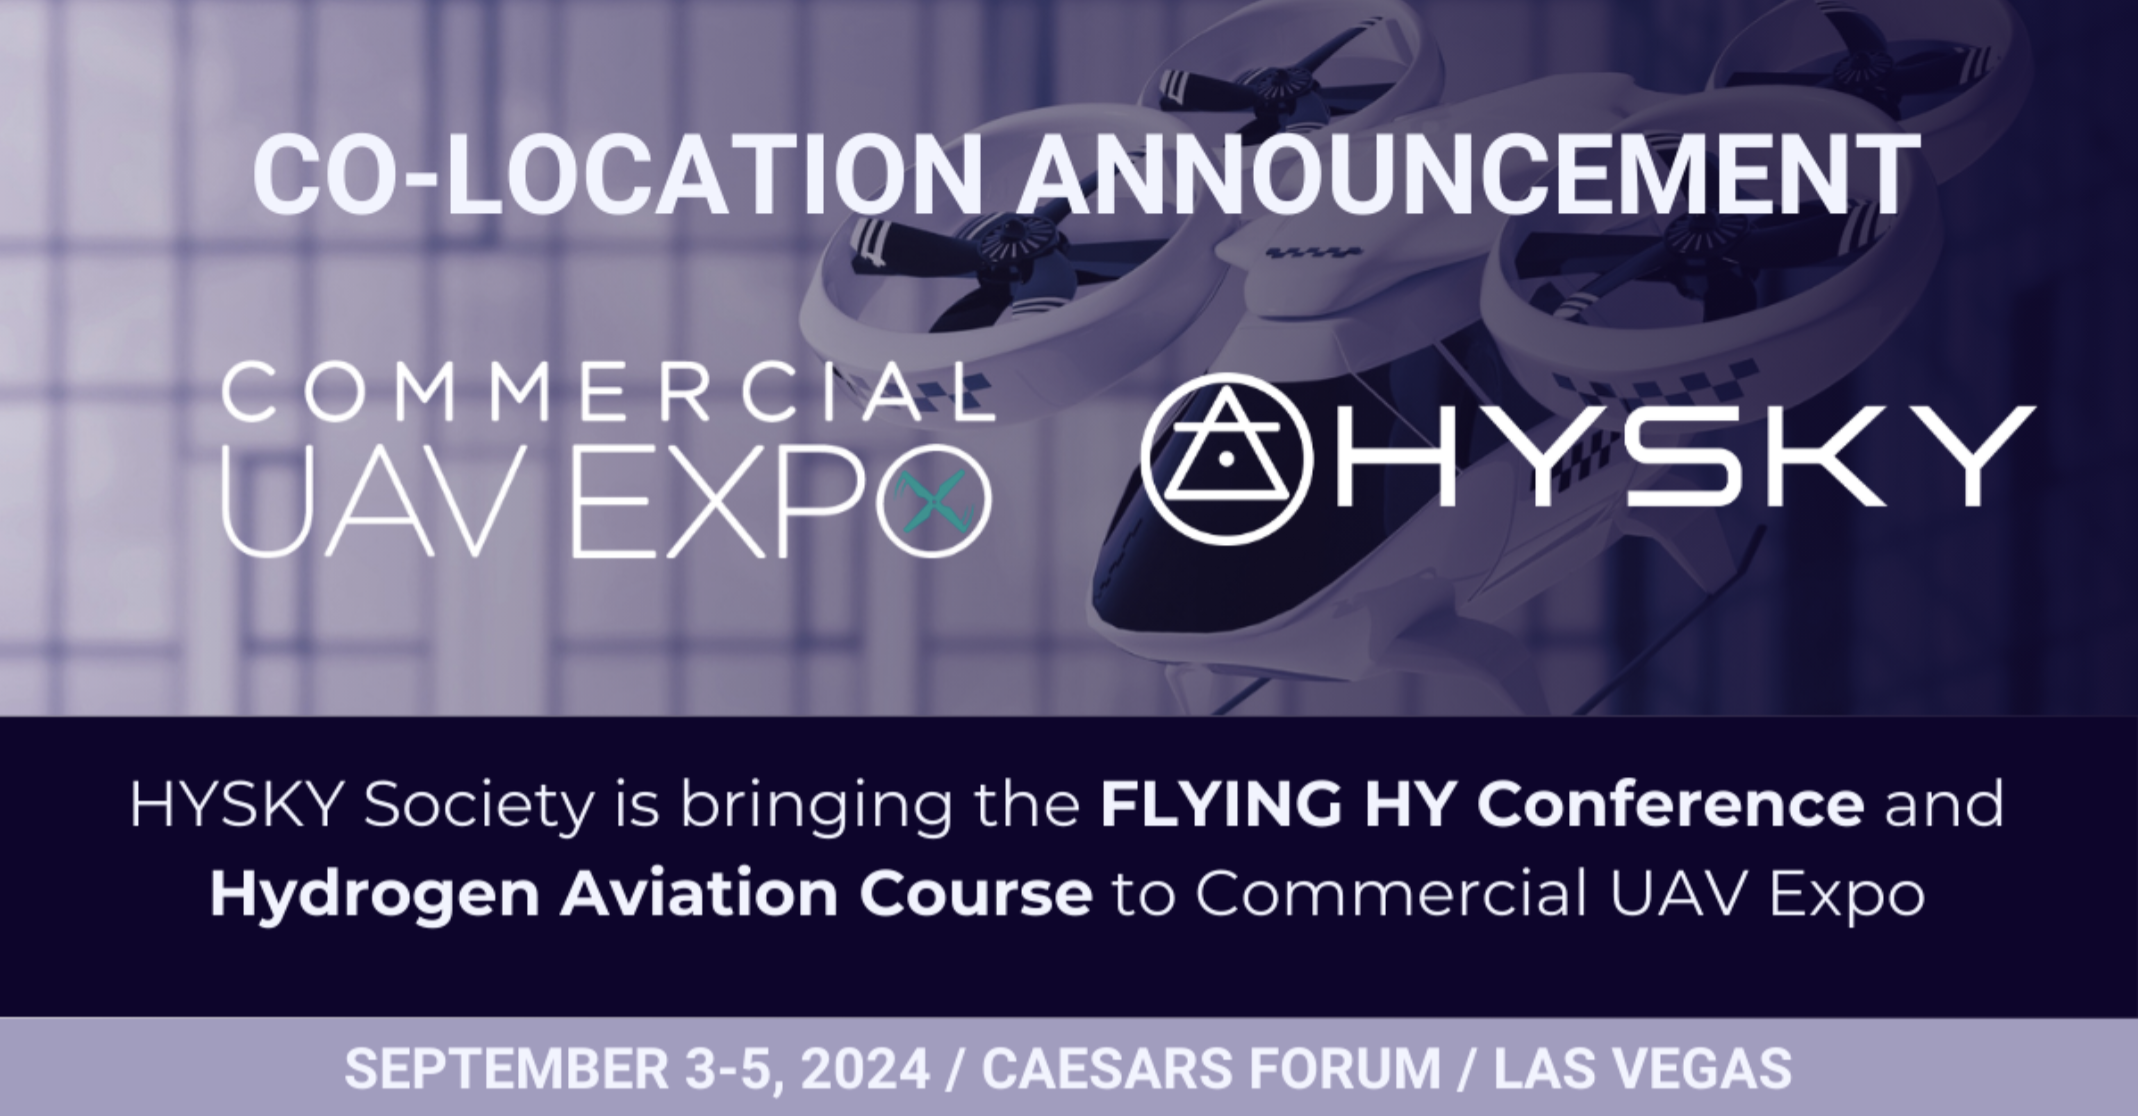 Banner announcing partnership between HYSKY Society and Commercial UAV Expo